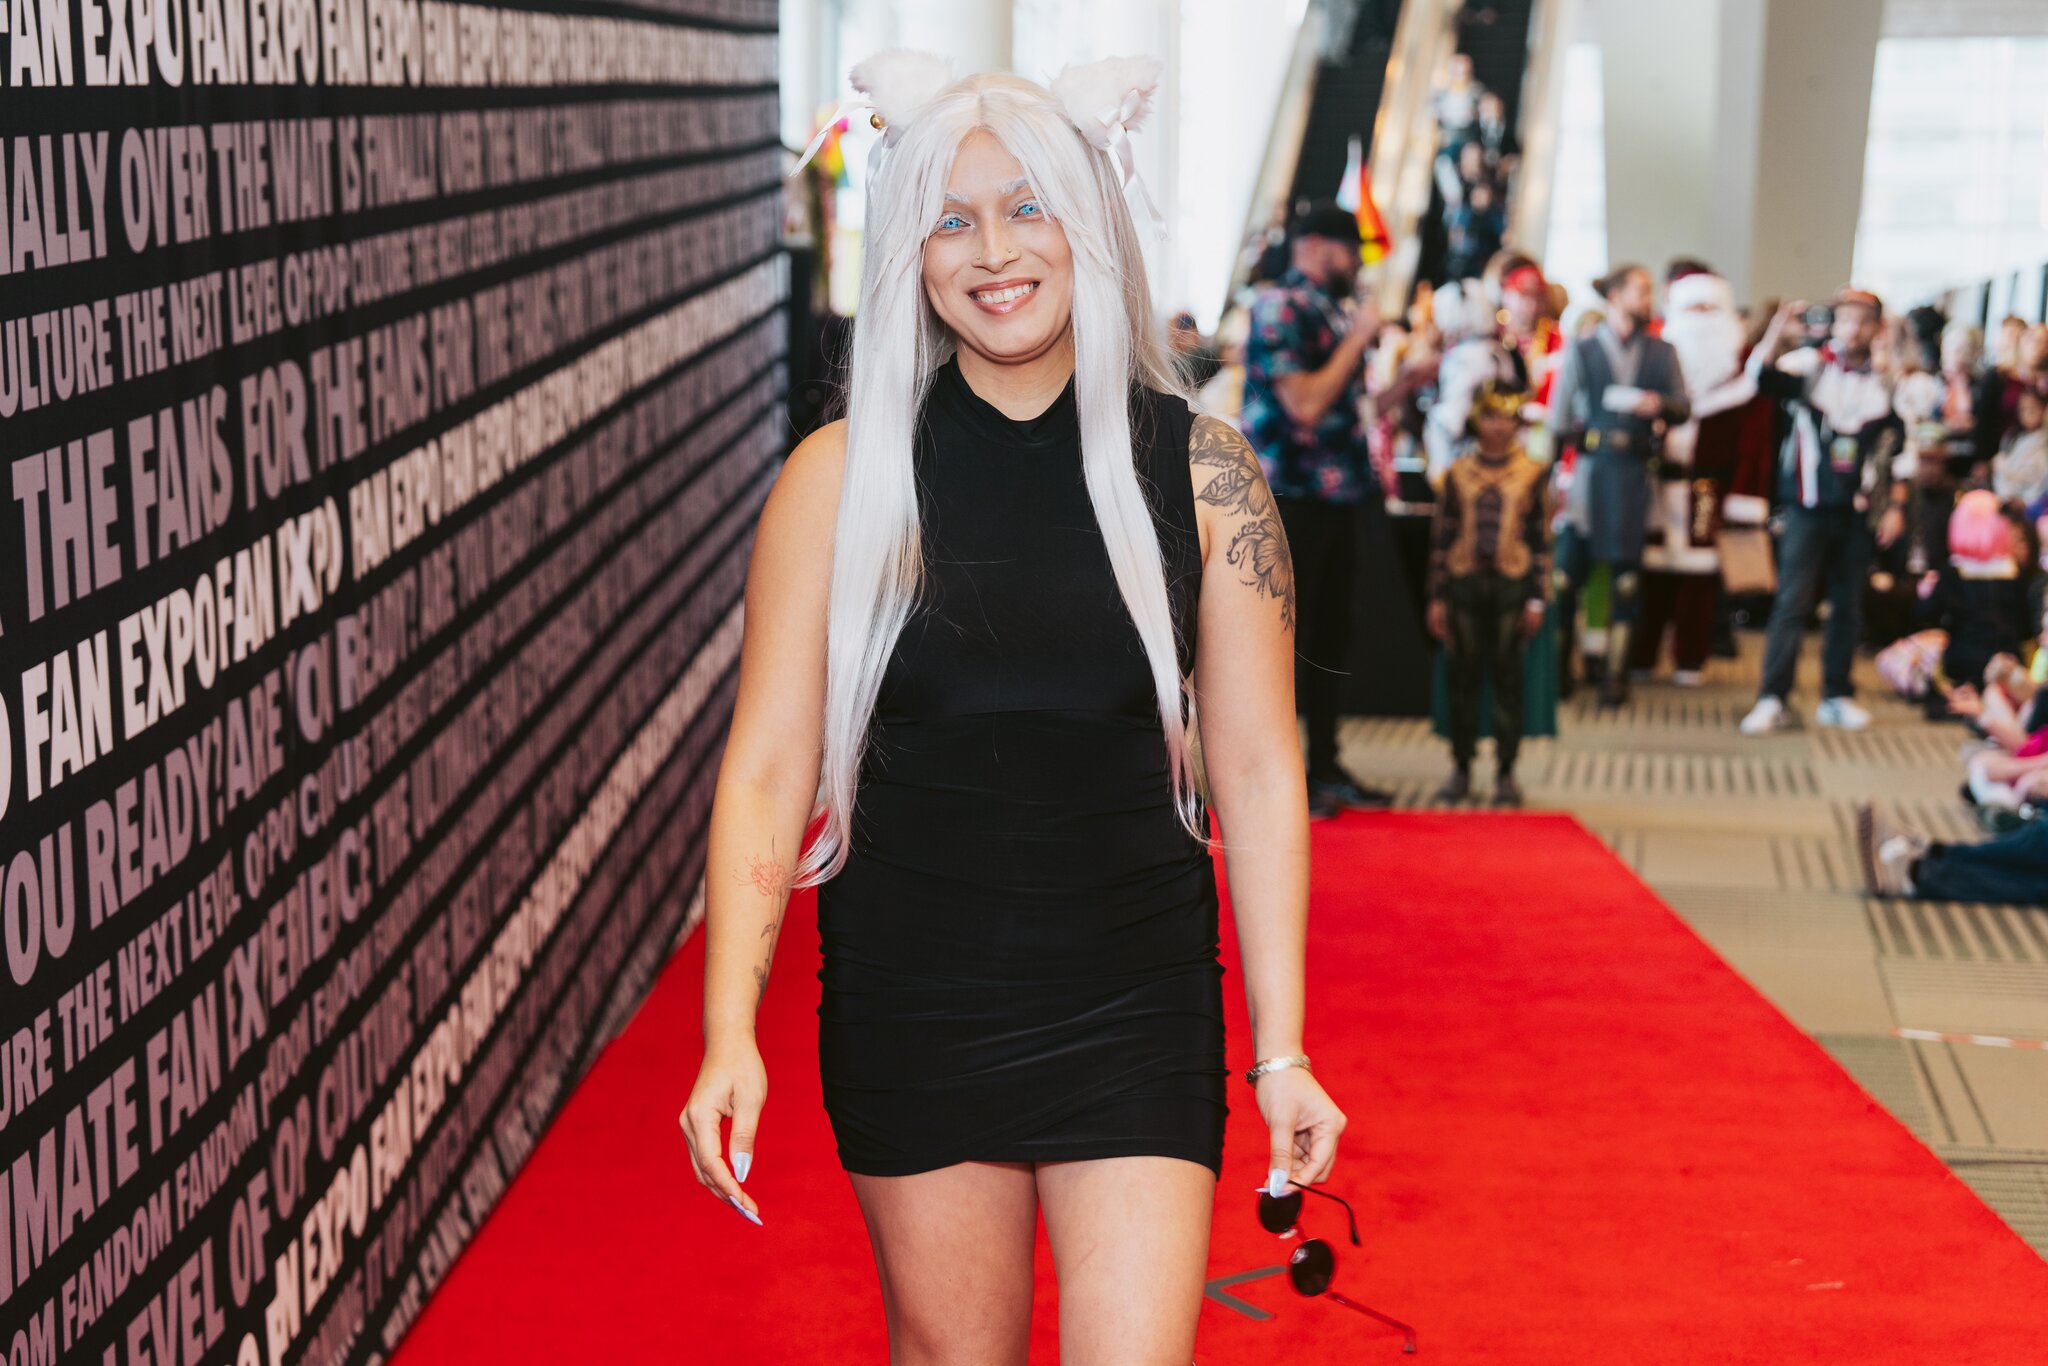 A smiling woman in costume walks down a red carpet.